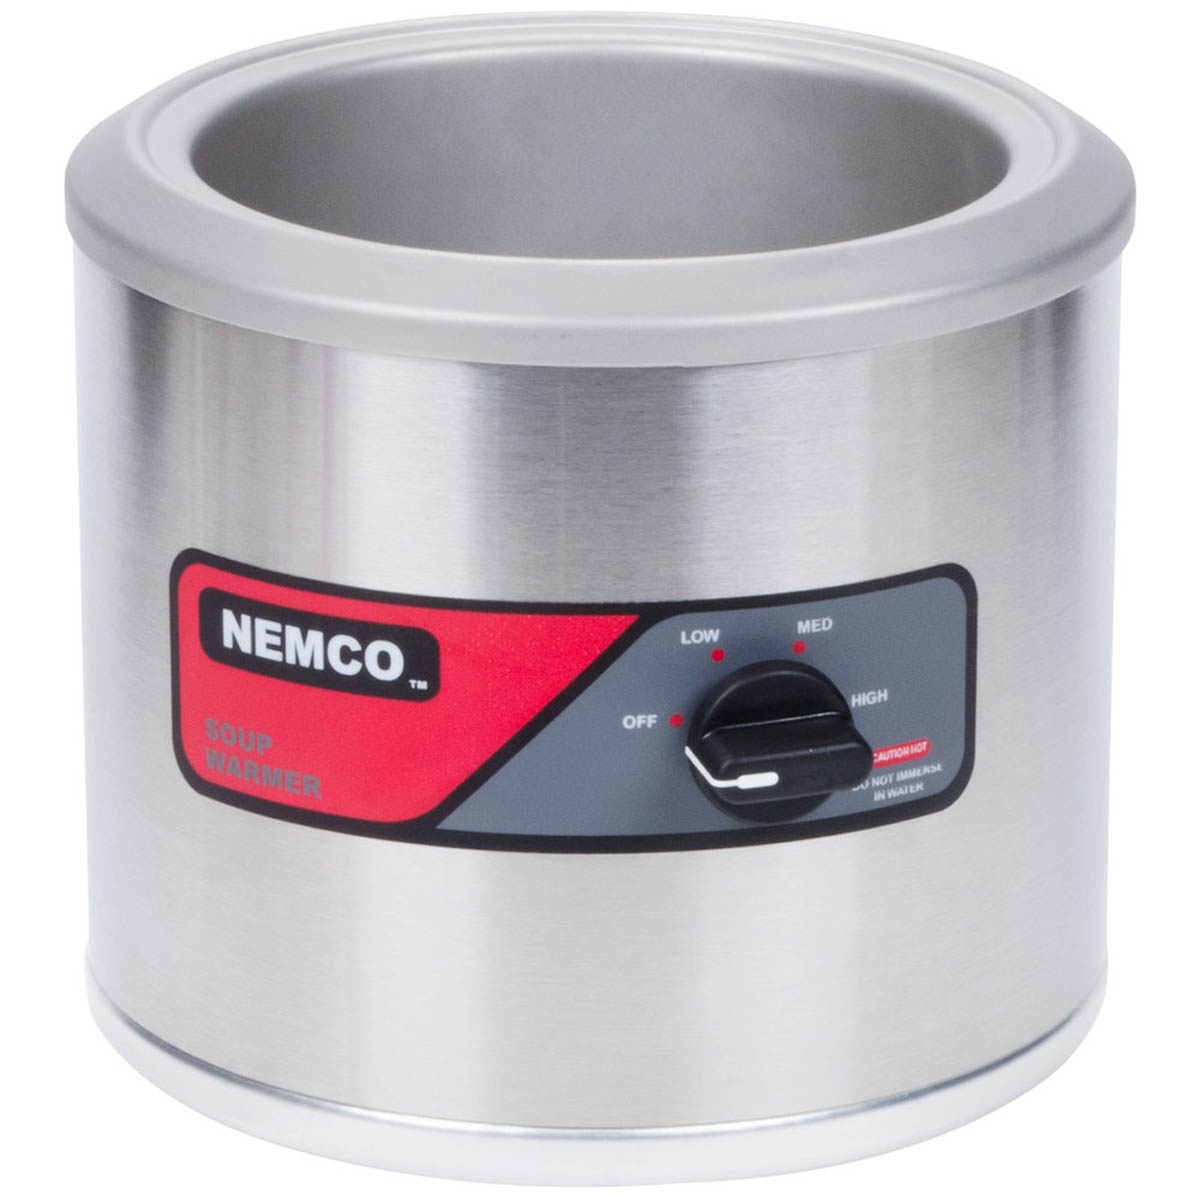 Nemco 6100A-ICL-220 Countertop Food Pan Warmer w/ 7-Qt. Capacity, Adjustable Thermostat, Inset